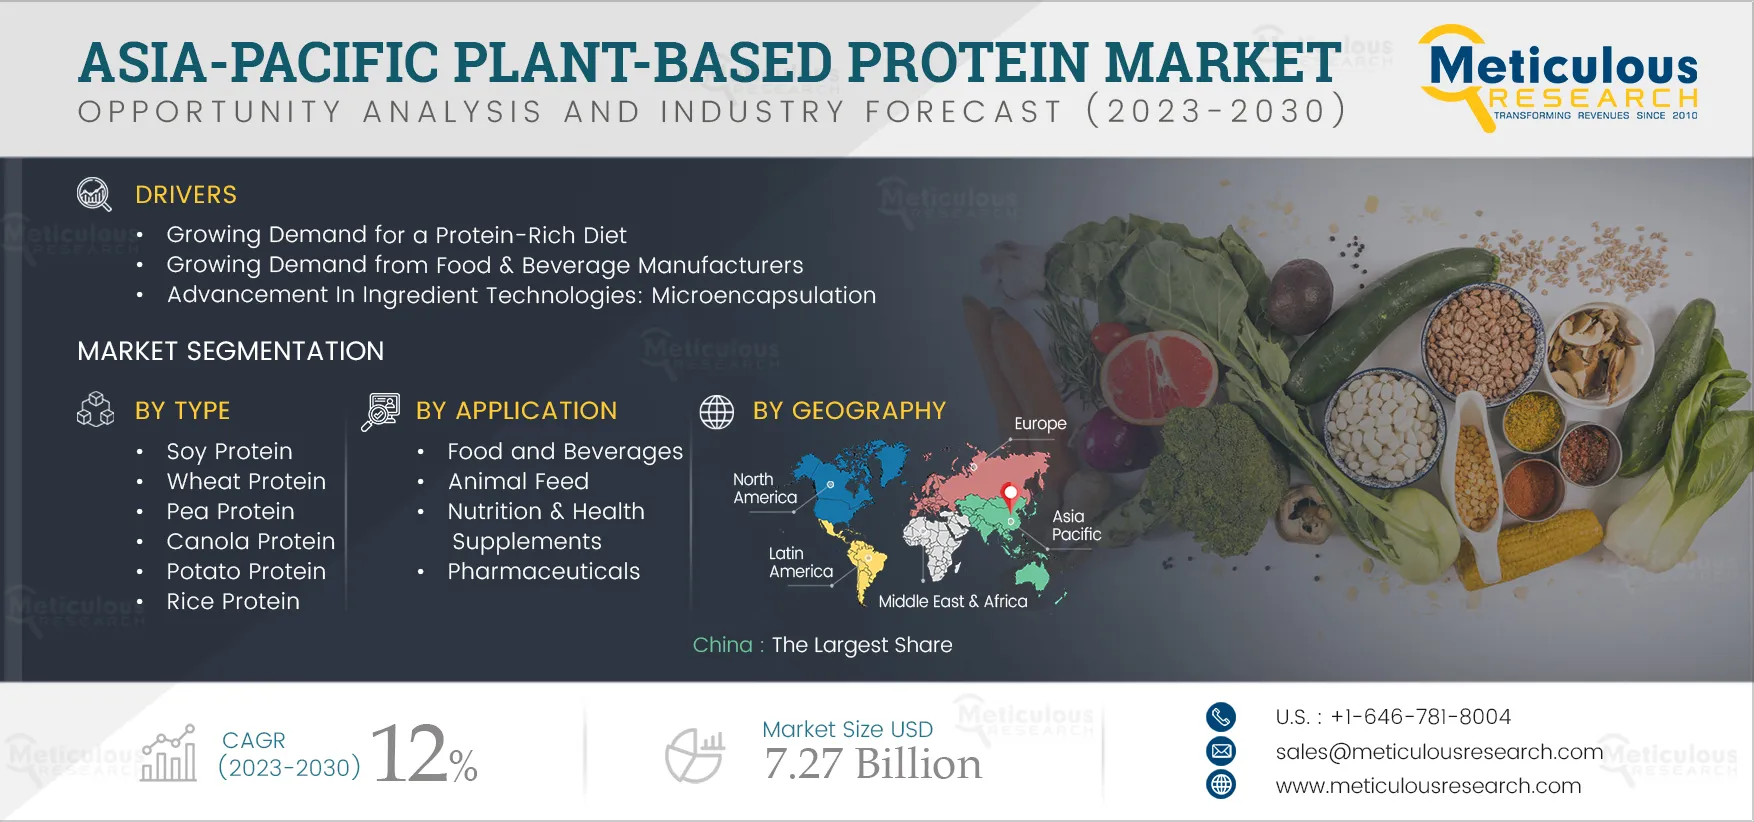 Asia-Pacific Plant-based Protein Market